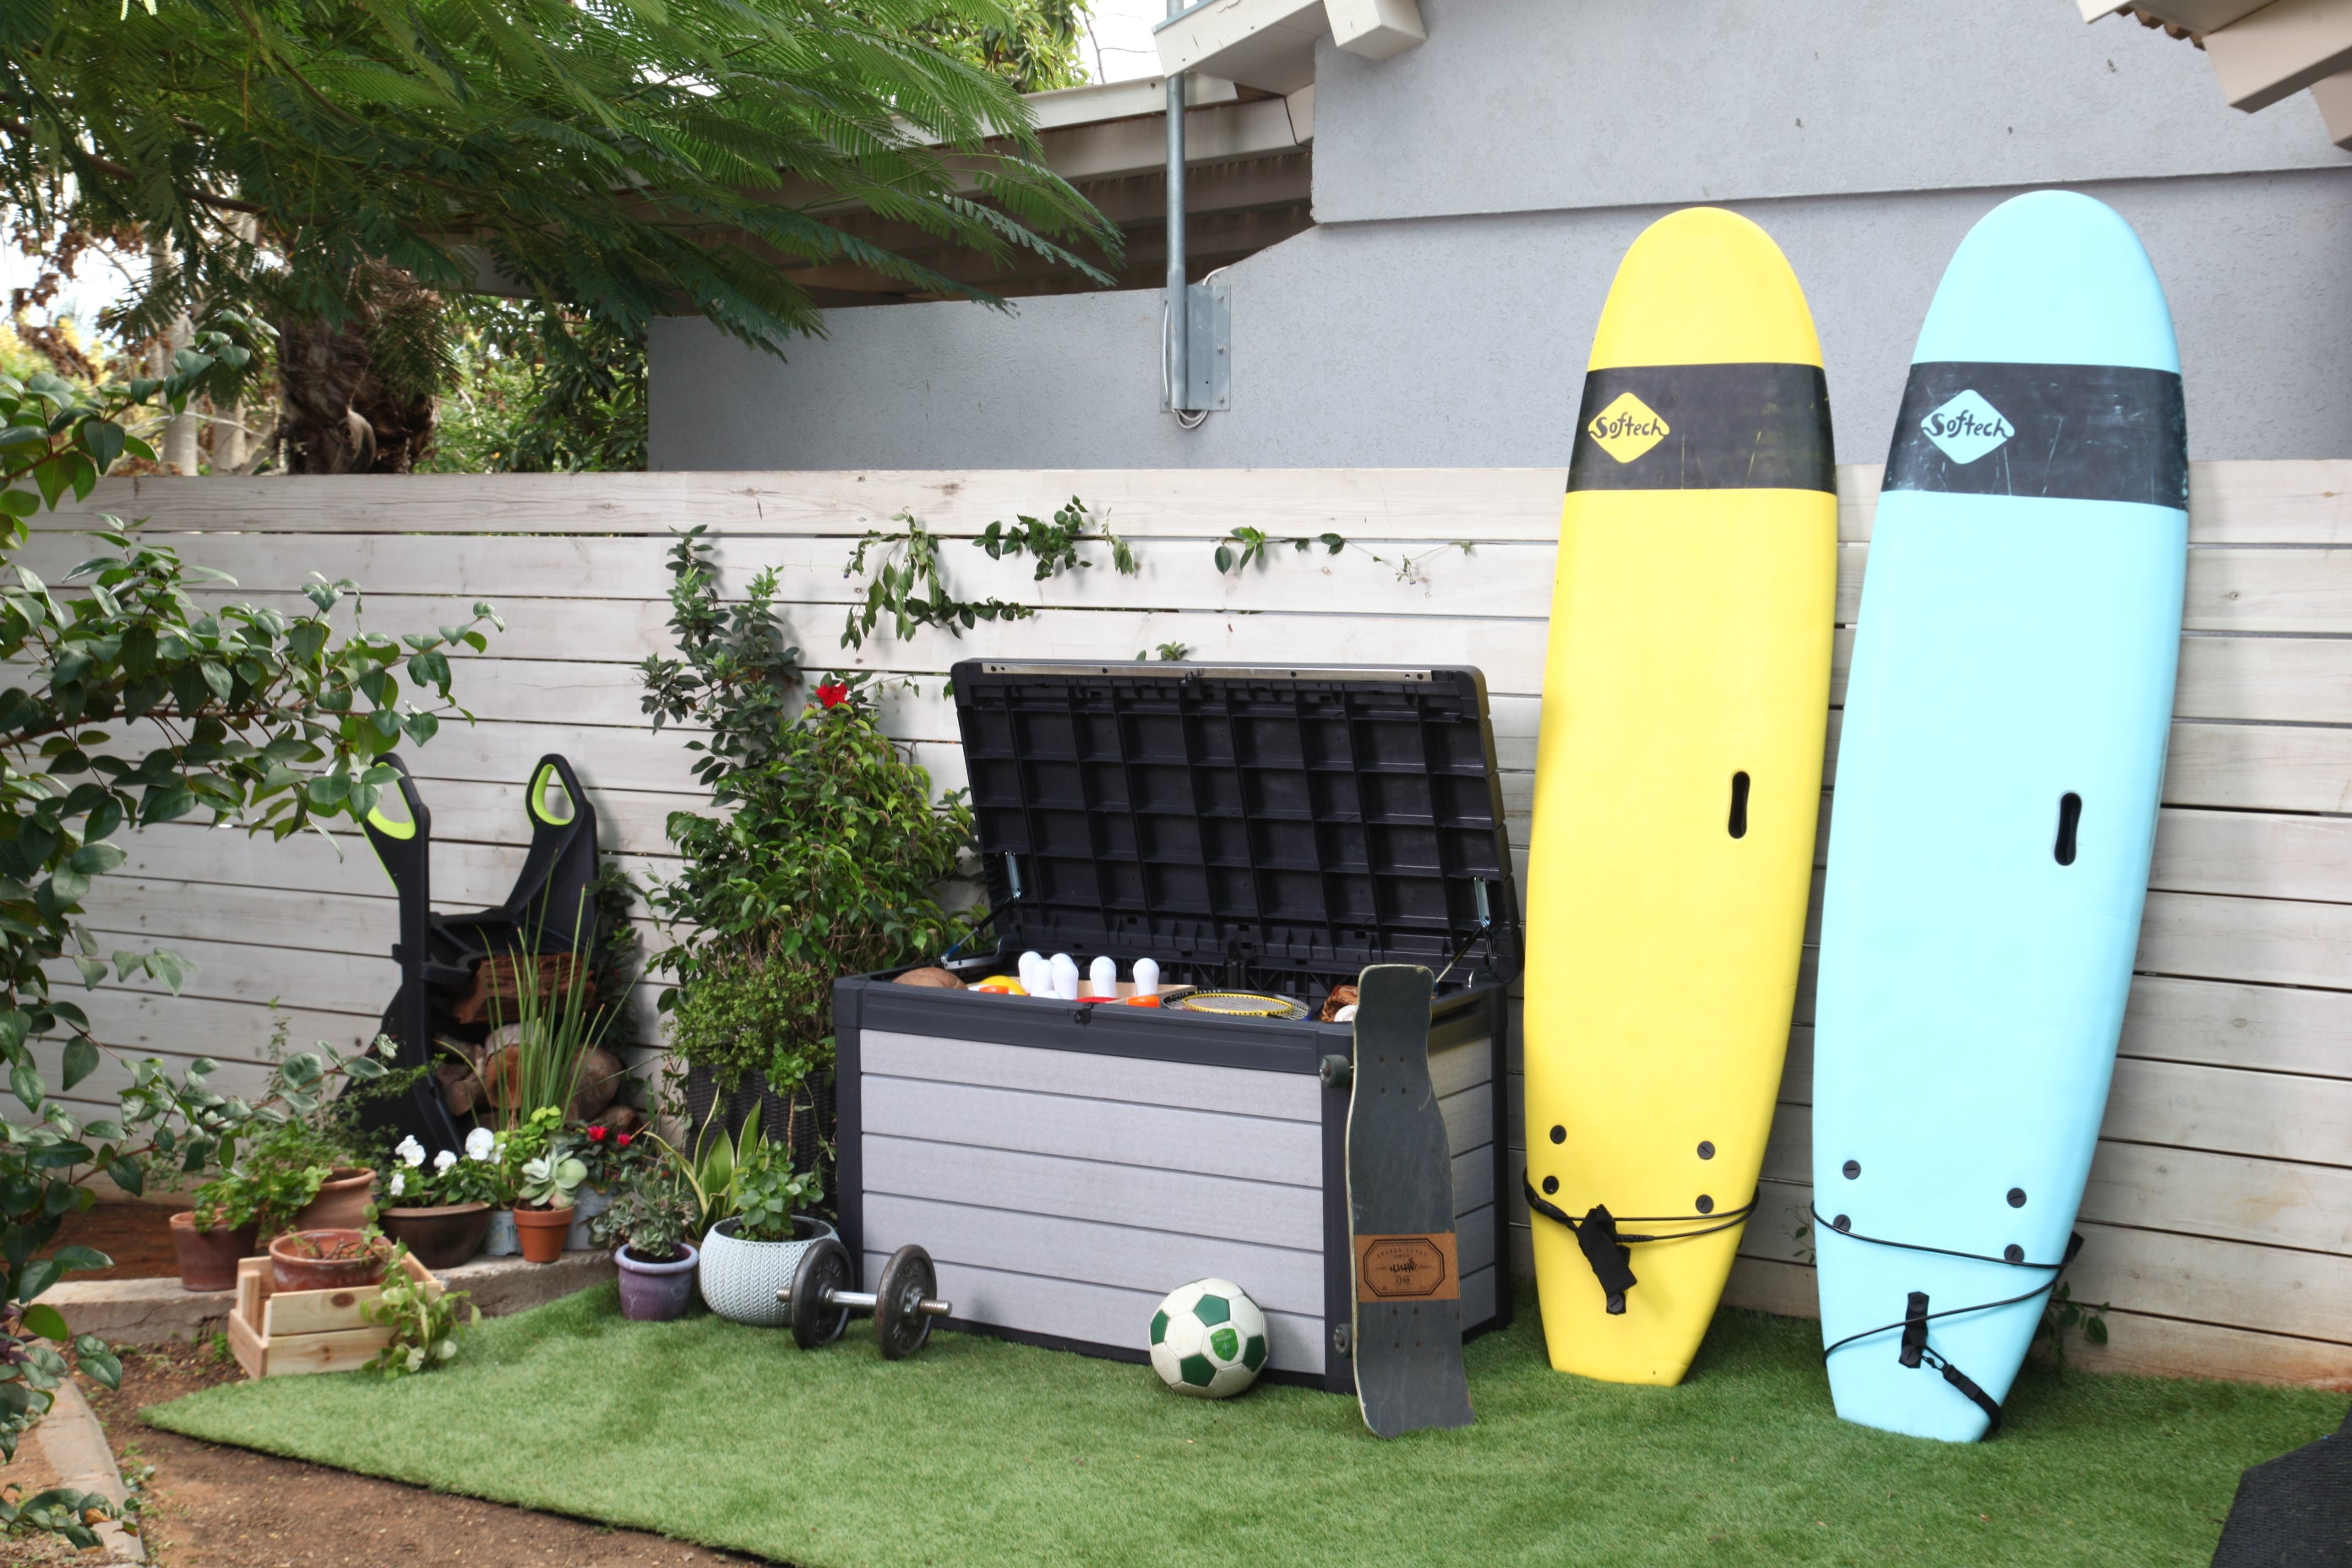 Cushion box in patio setting with surfboards and sports equipment